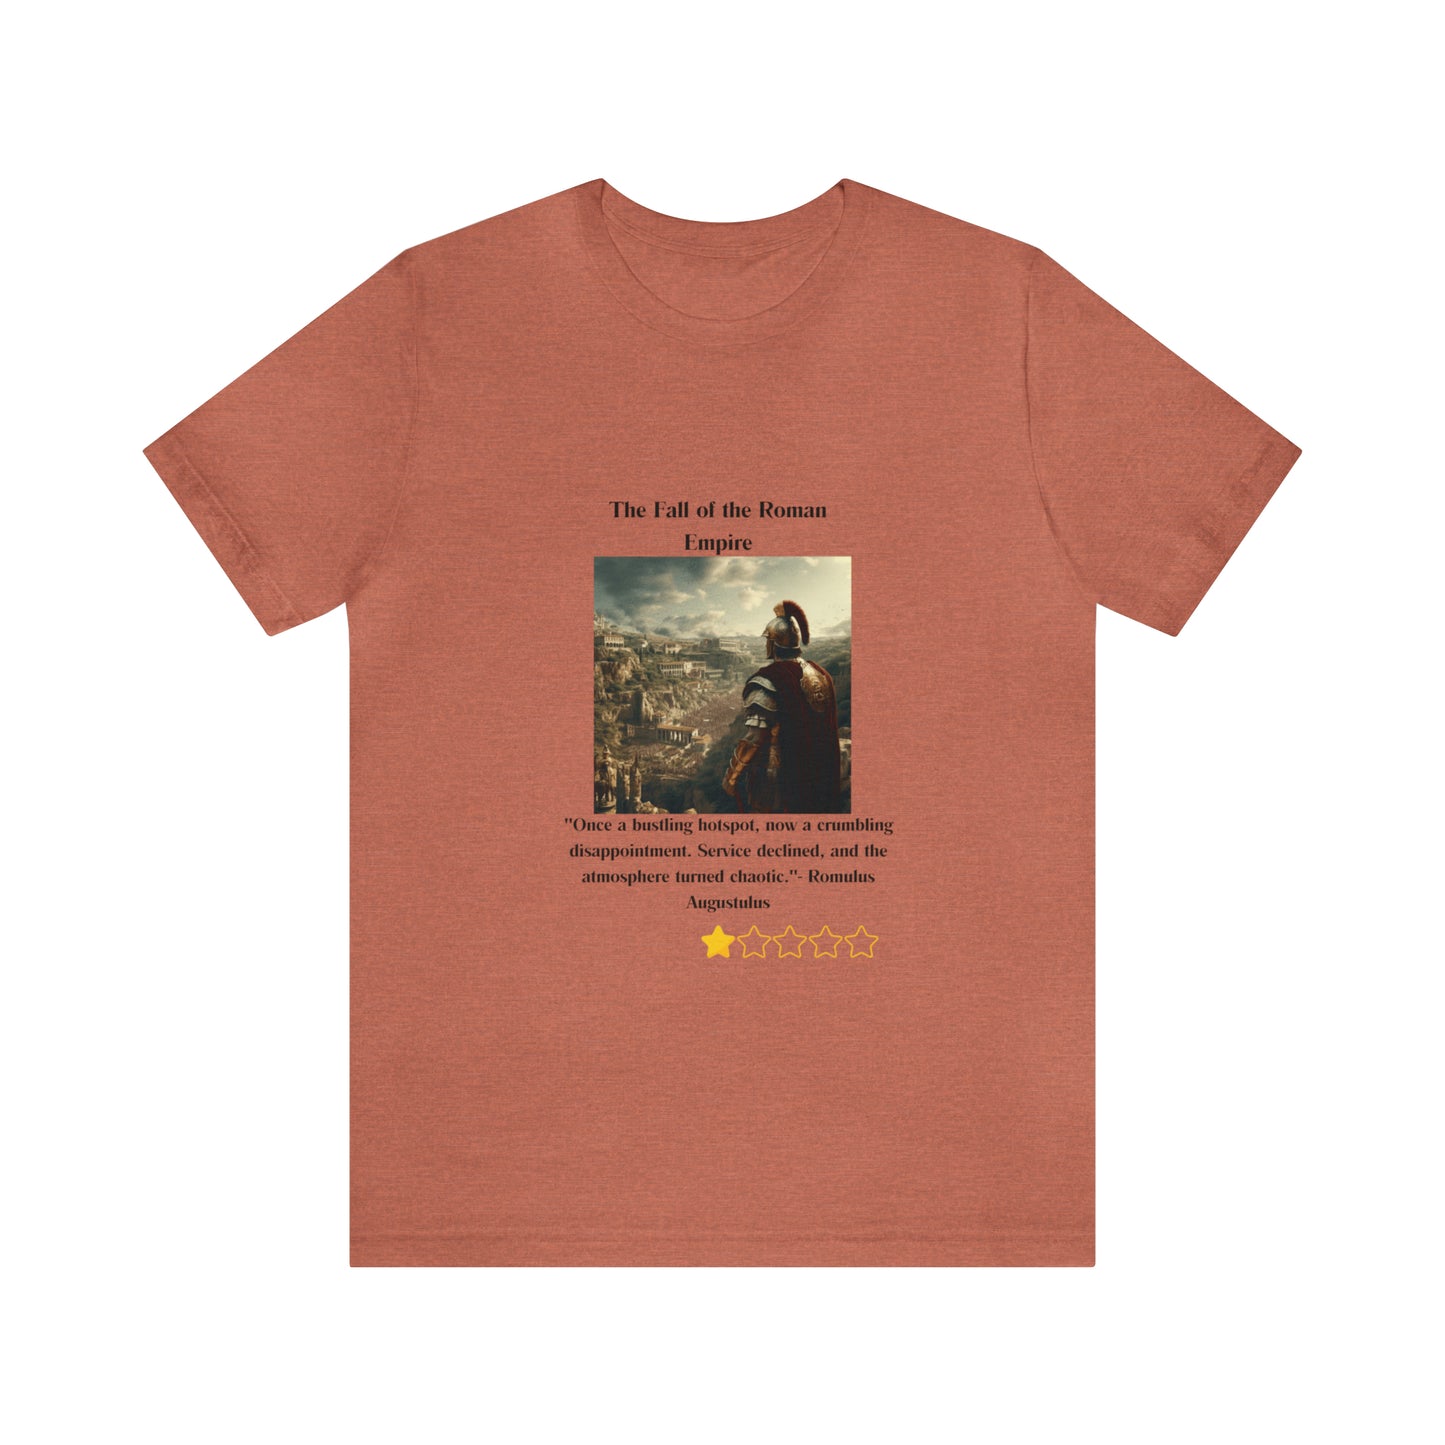 The Fall of Rome" Yelp Review tee,